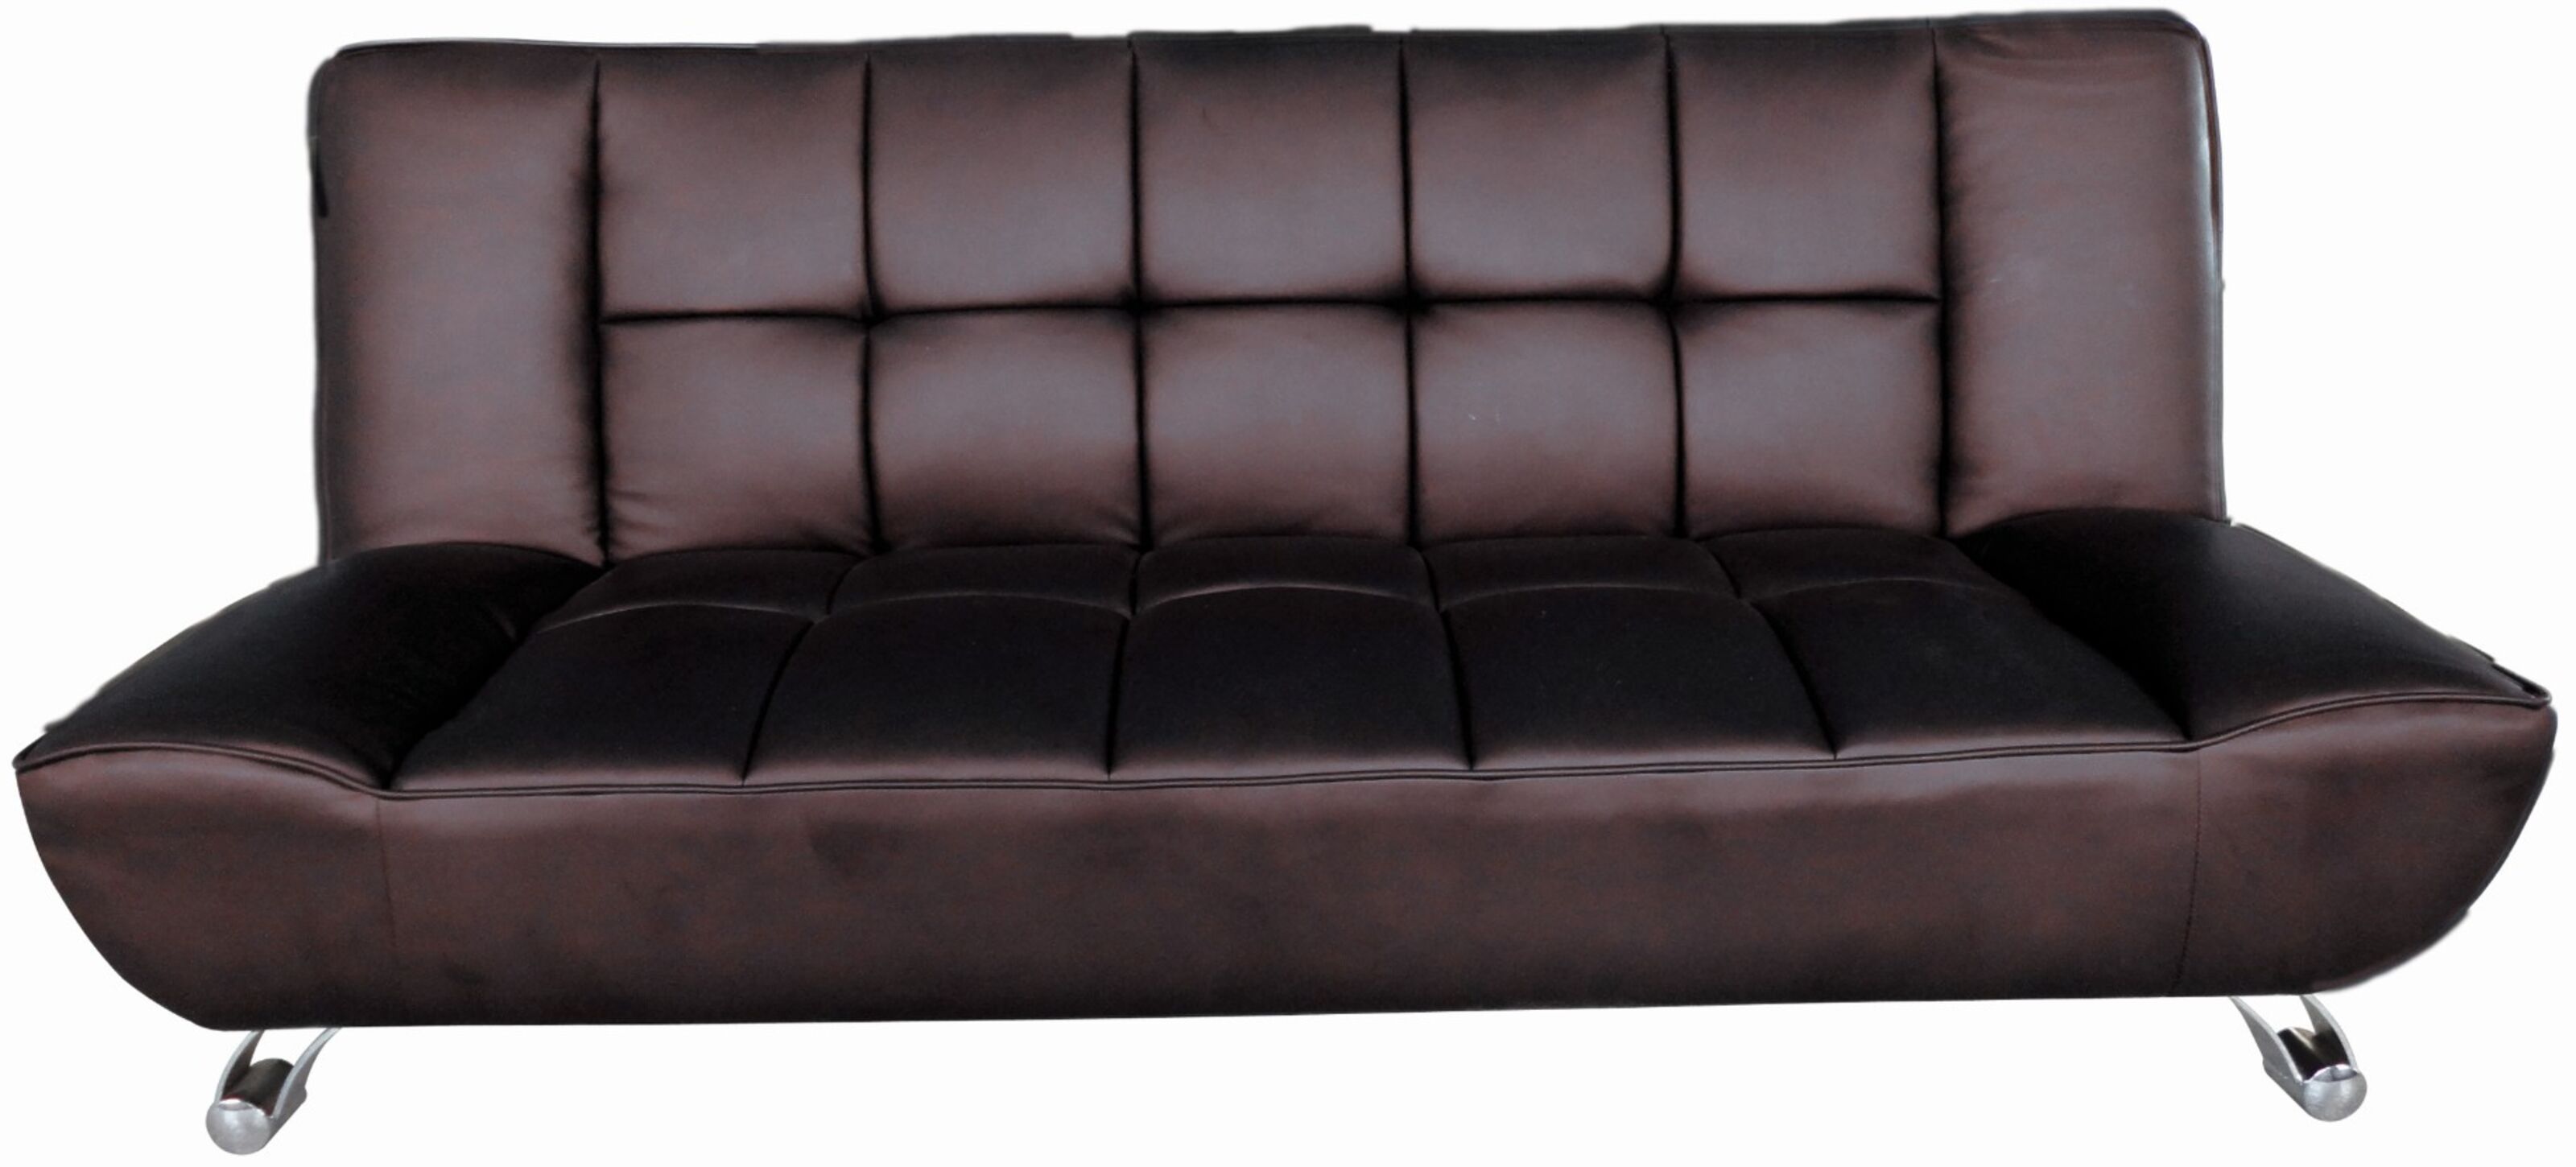 Agata Brown Faux Leather Sofa Bed With Curved Chrome Finish Legs Designer Sofas4u